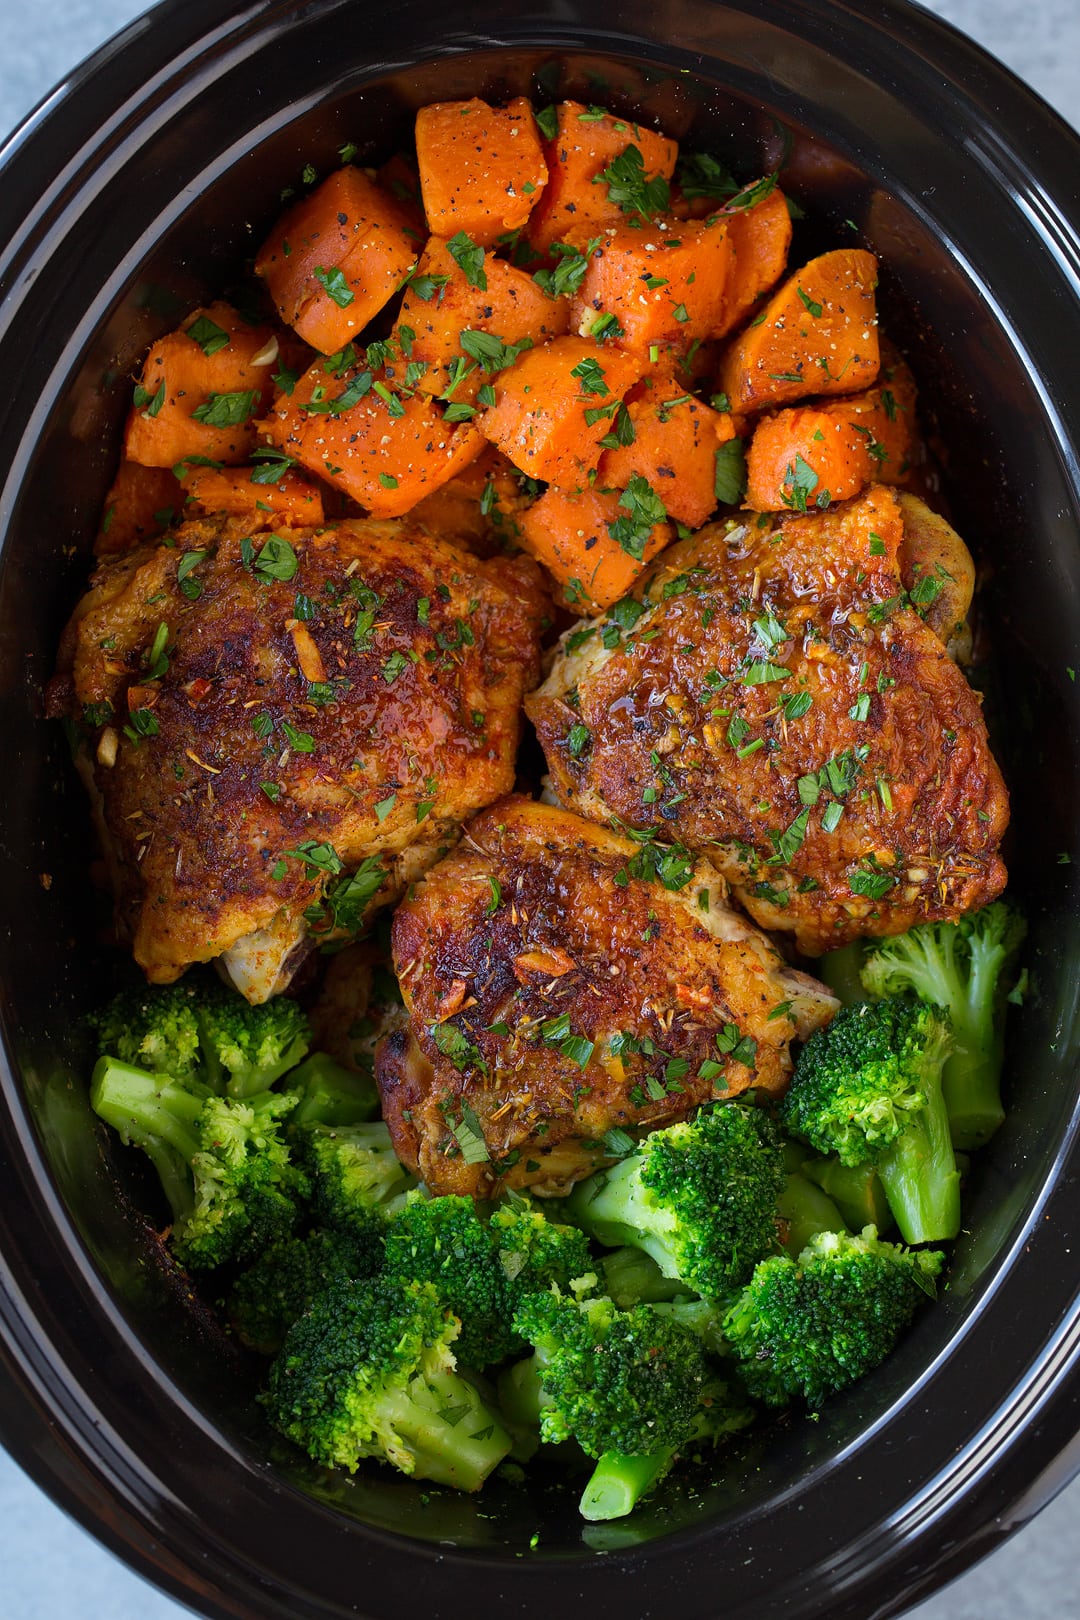 Slow Cooker Chicken With Sweet Potatoes And Broccoli Cooking Classy